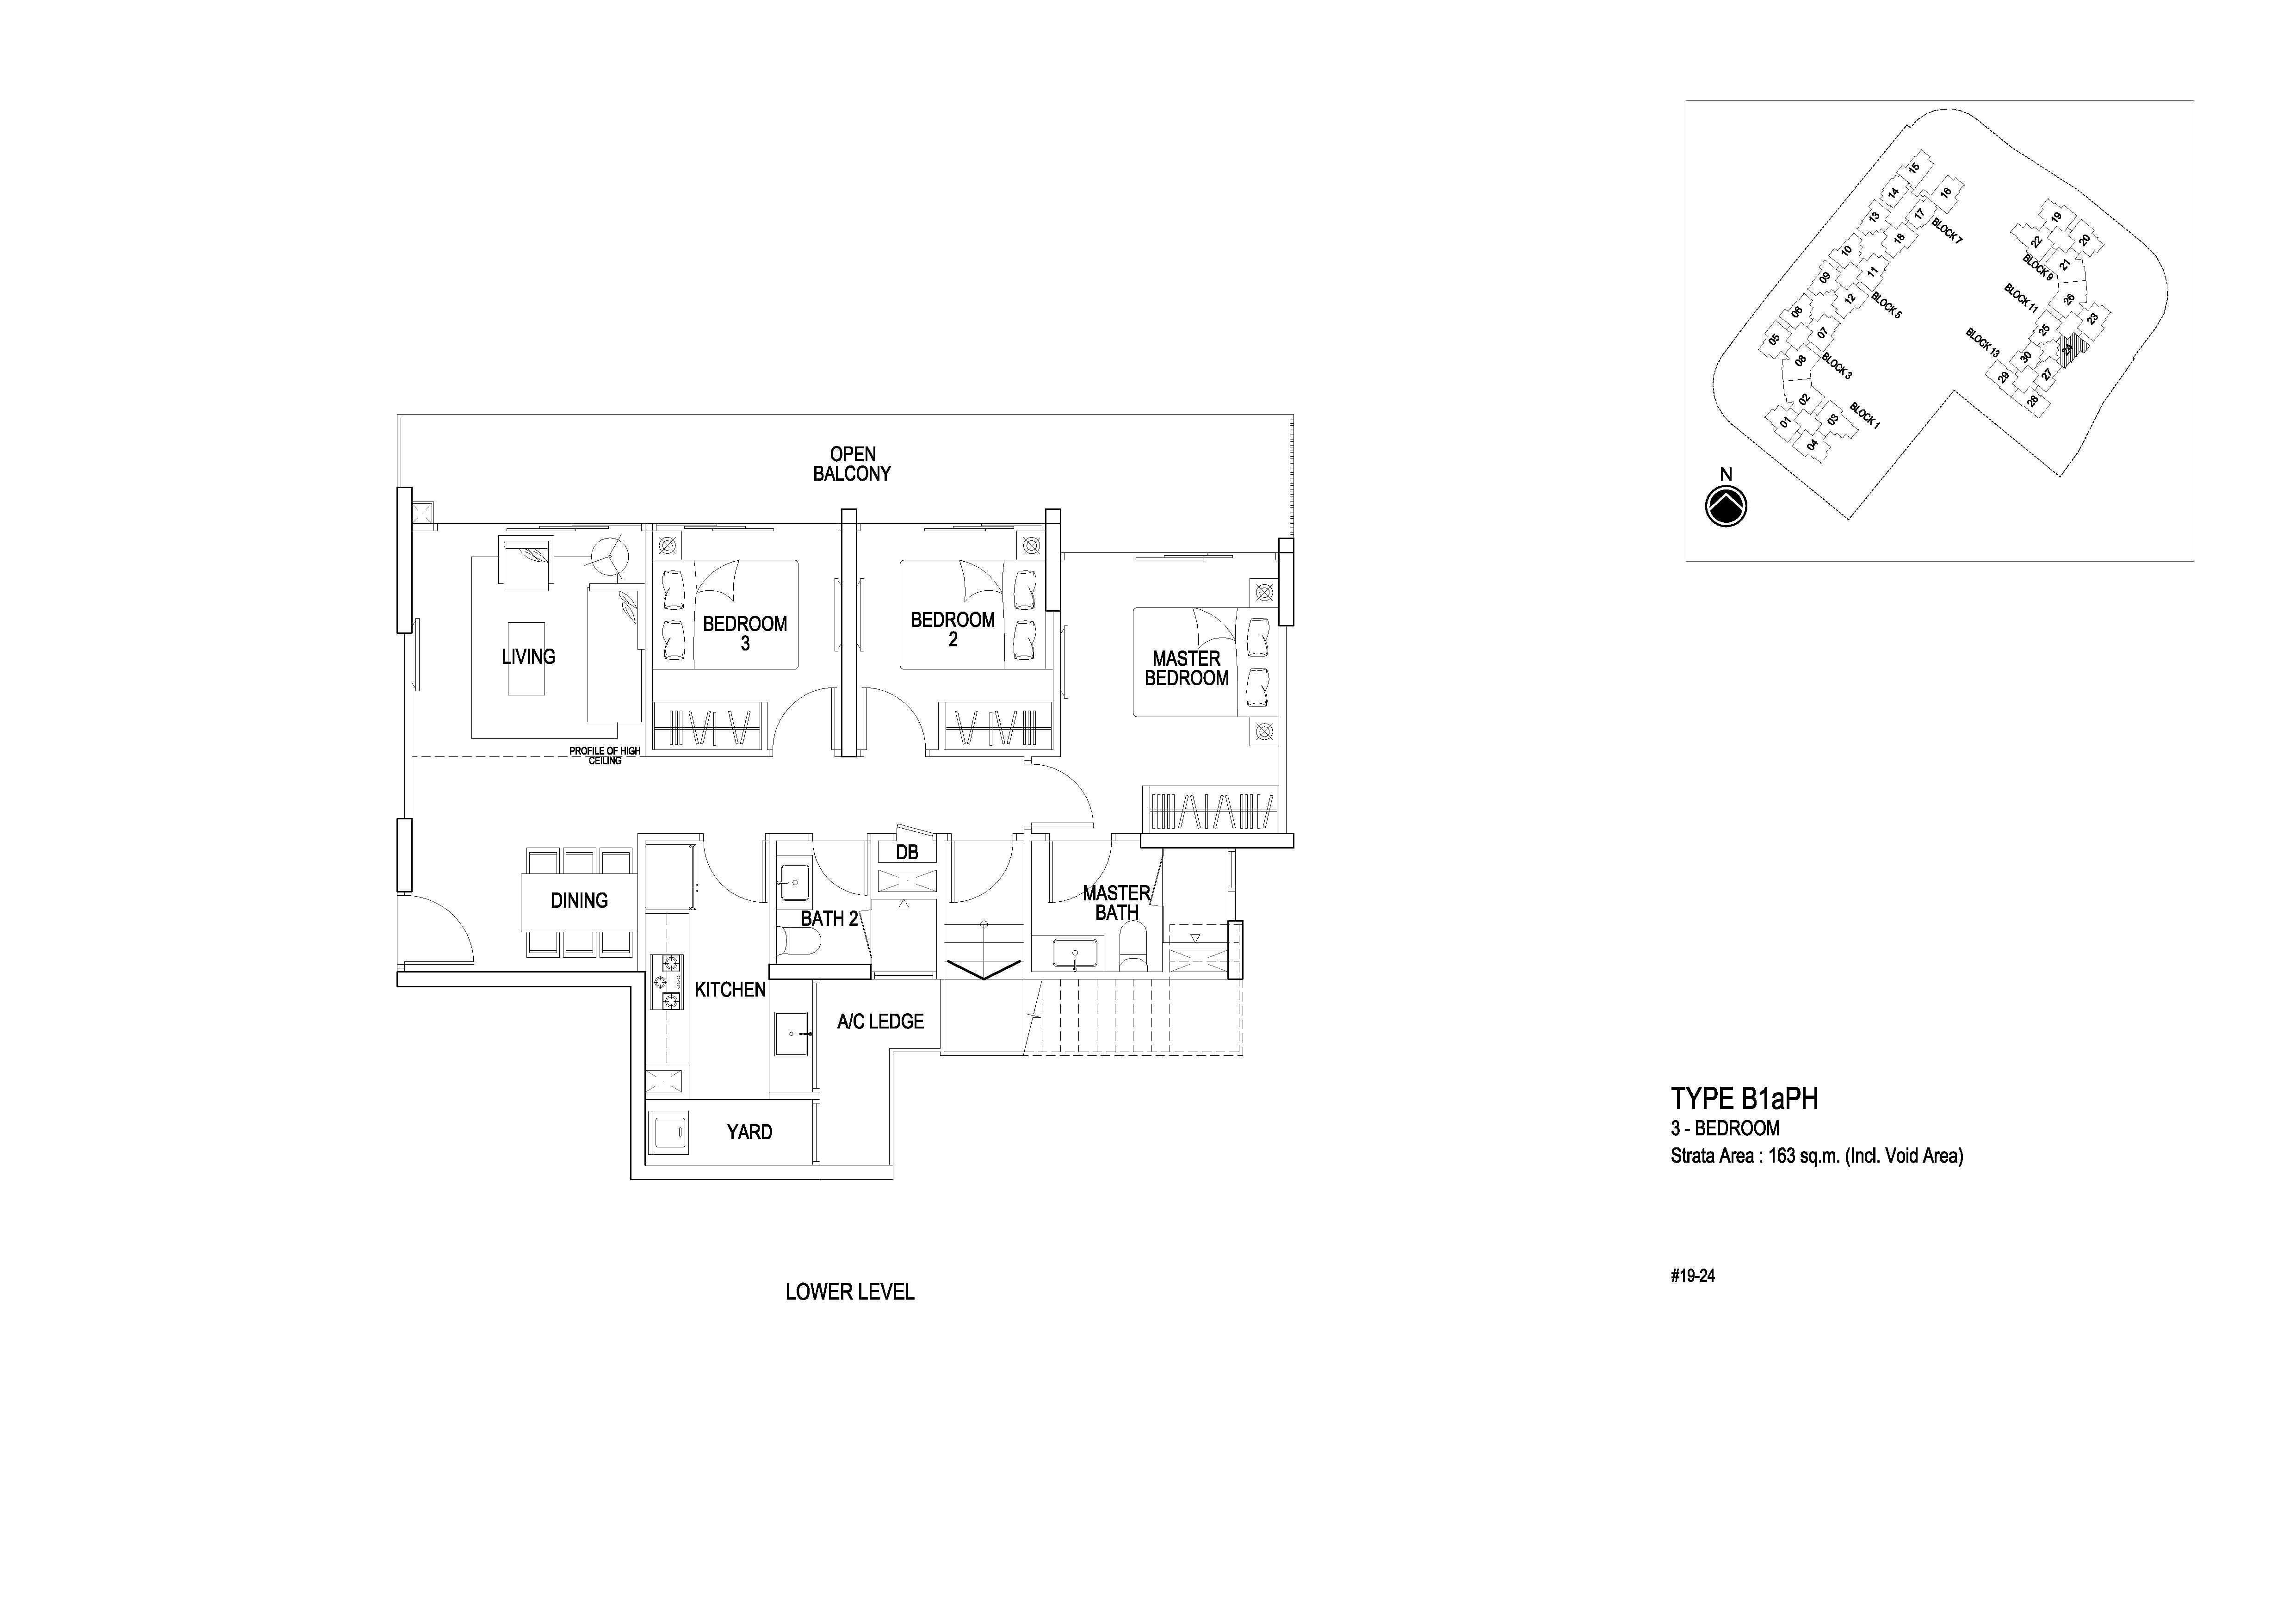 Flo Residence 3 Bedroom Penthouse Lower Level Floor Plans Type B1aPH